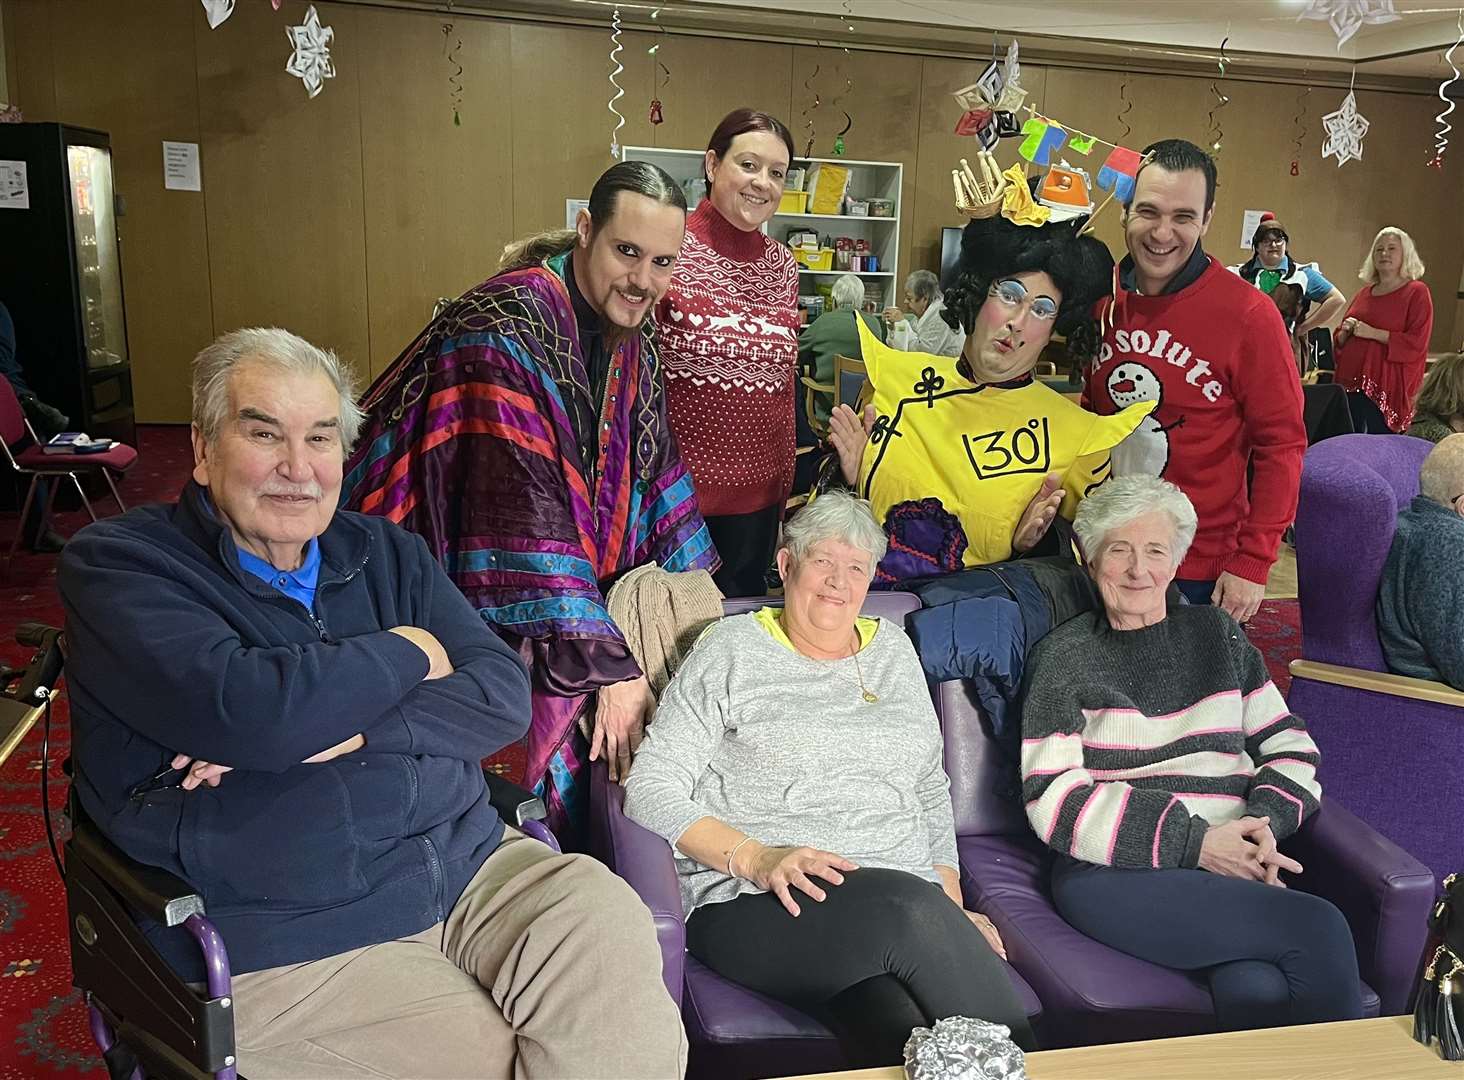 The panto cast of Aladdin surprised ellenor hospice patients at an exercise class